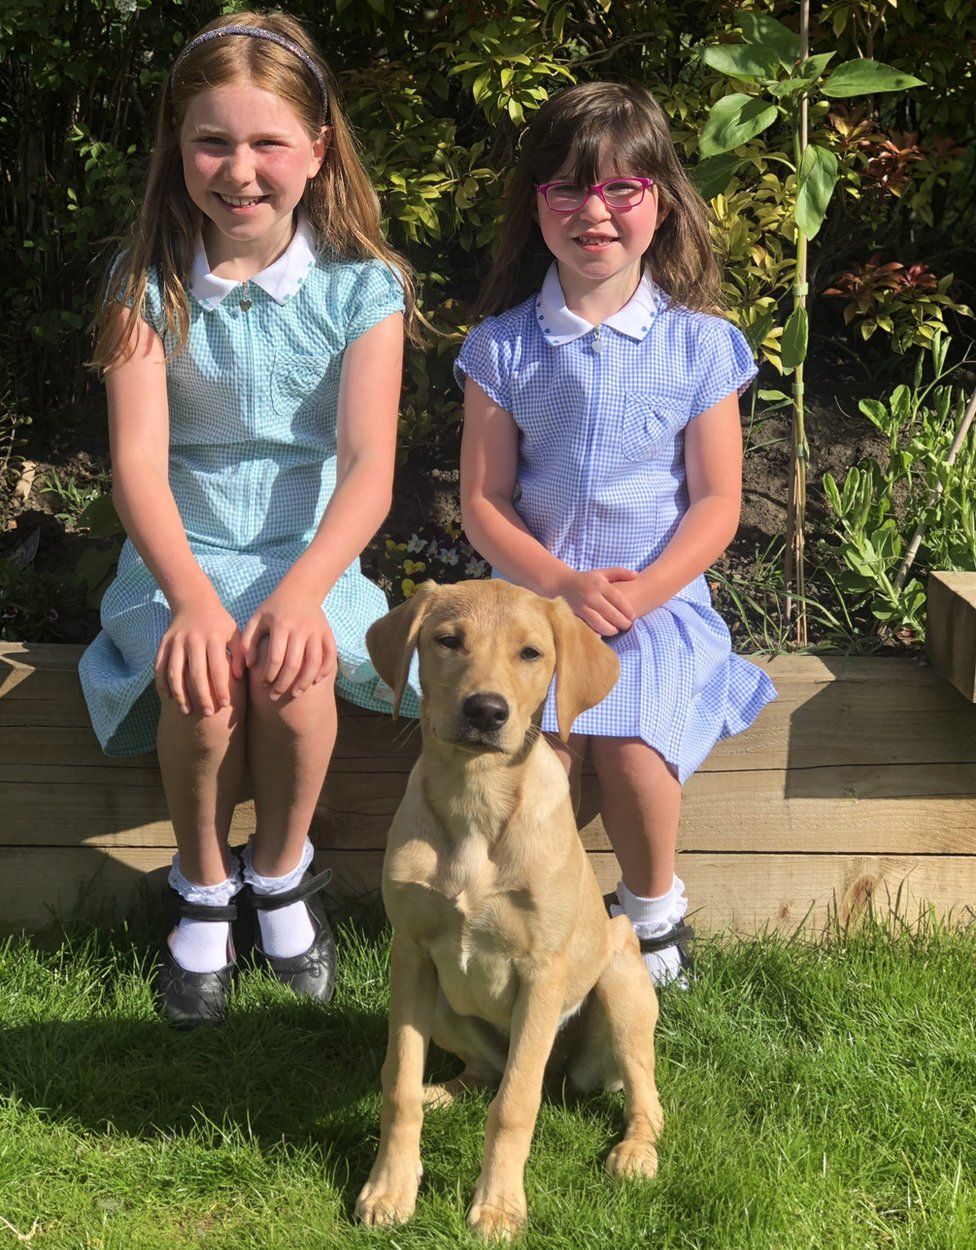 Abigail, age 8, and Emilia, age 6, with Pippa the puppy